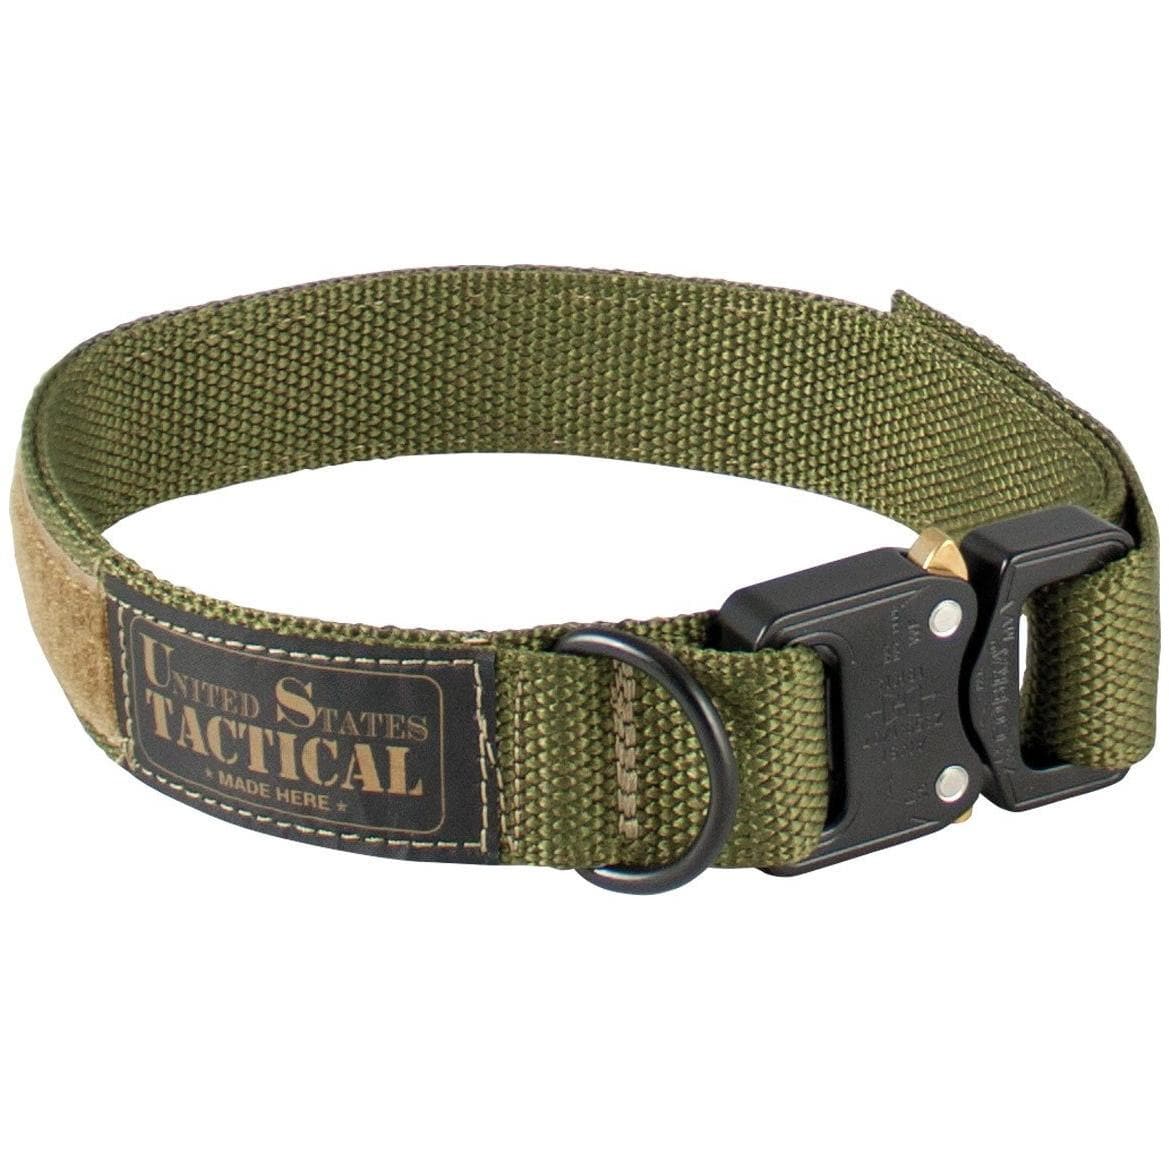 United States Tactical Tactical Gear M / Olive Drab United States Tactical Dog Collar with COBRA Buckle